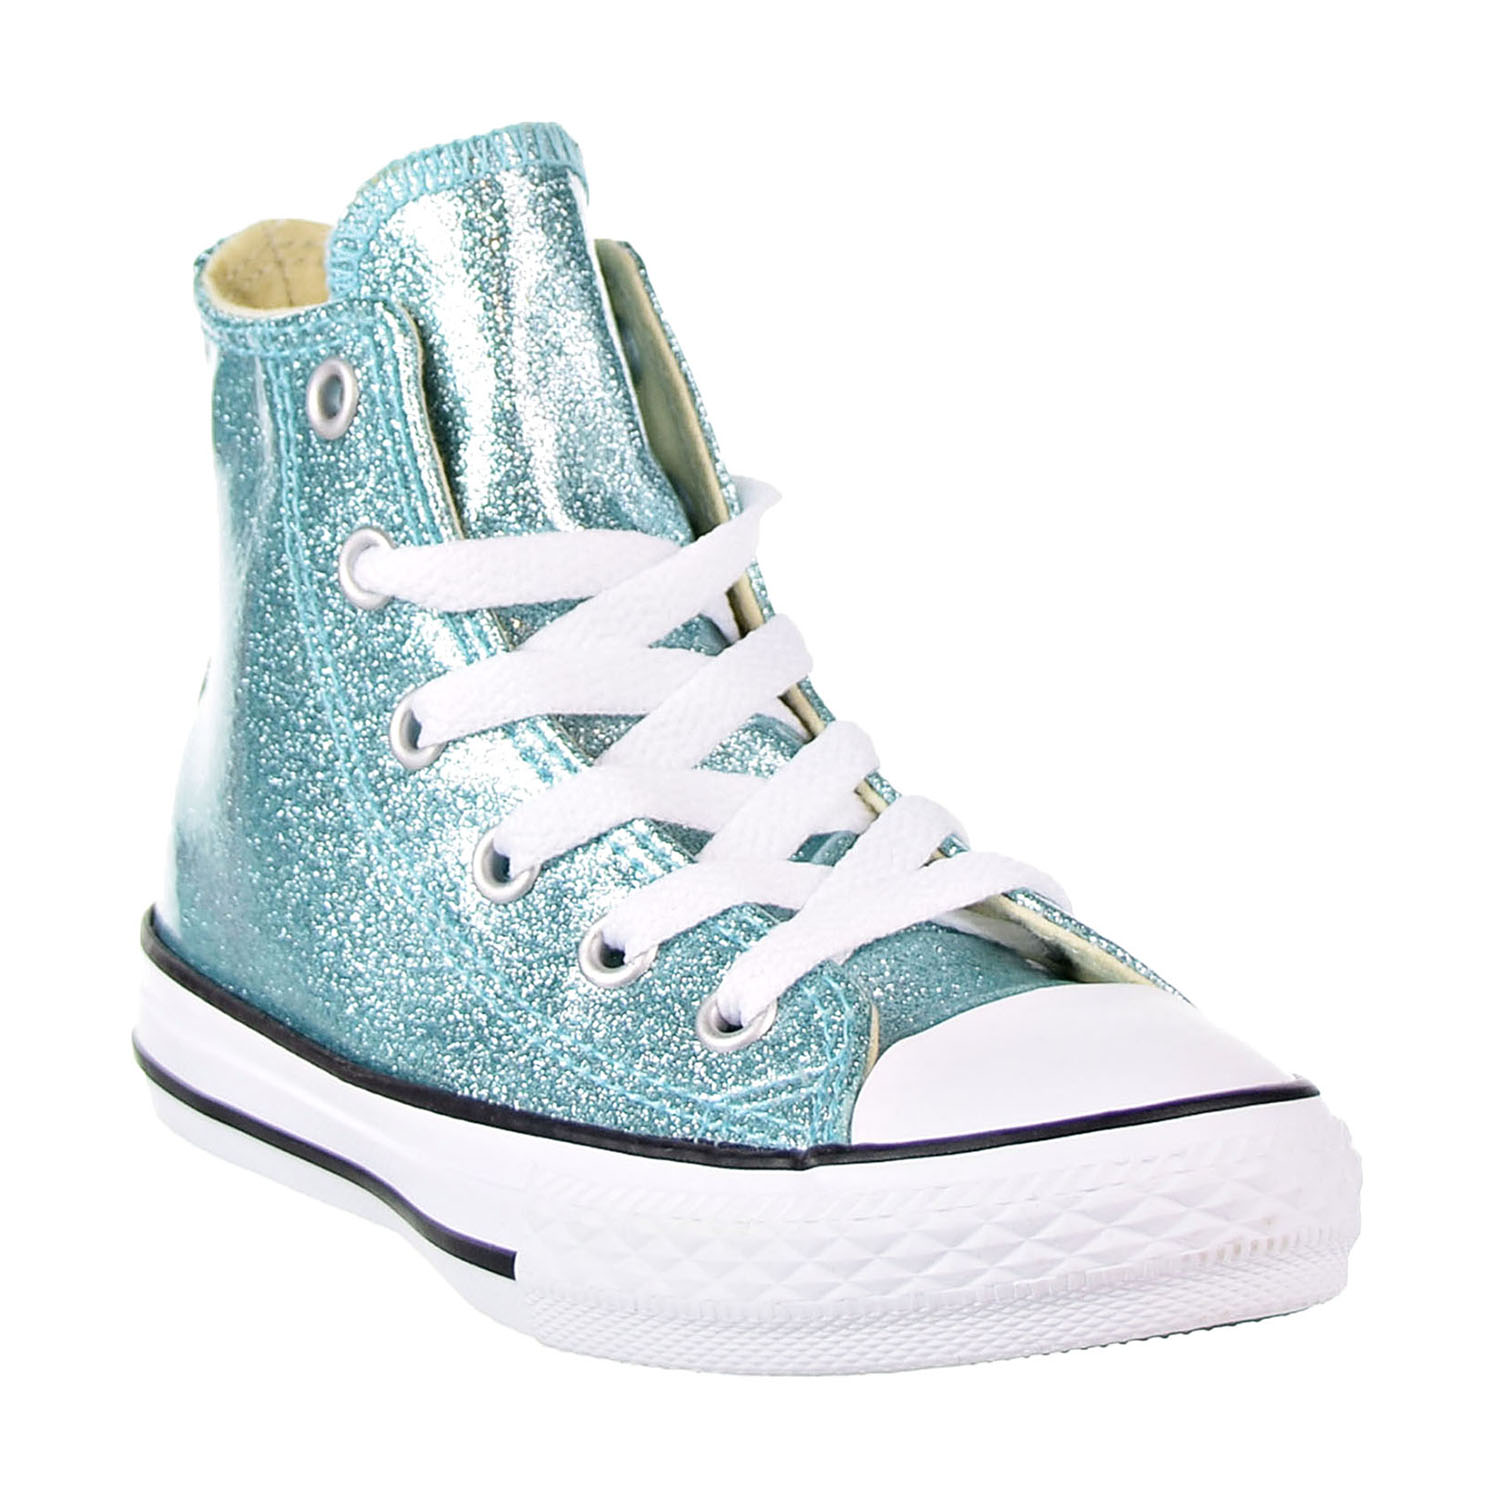 Converse Unisex CHUCK TAYLOR ALL STAR HI-TOP, BLEACHED AQUA/NATURAL/WHITE - image 2 of 6